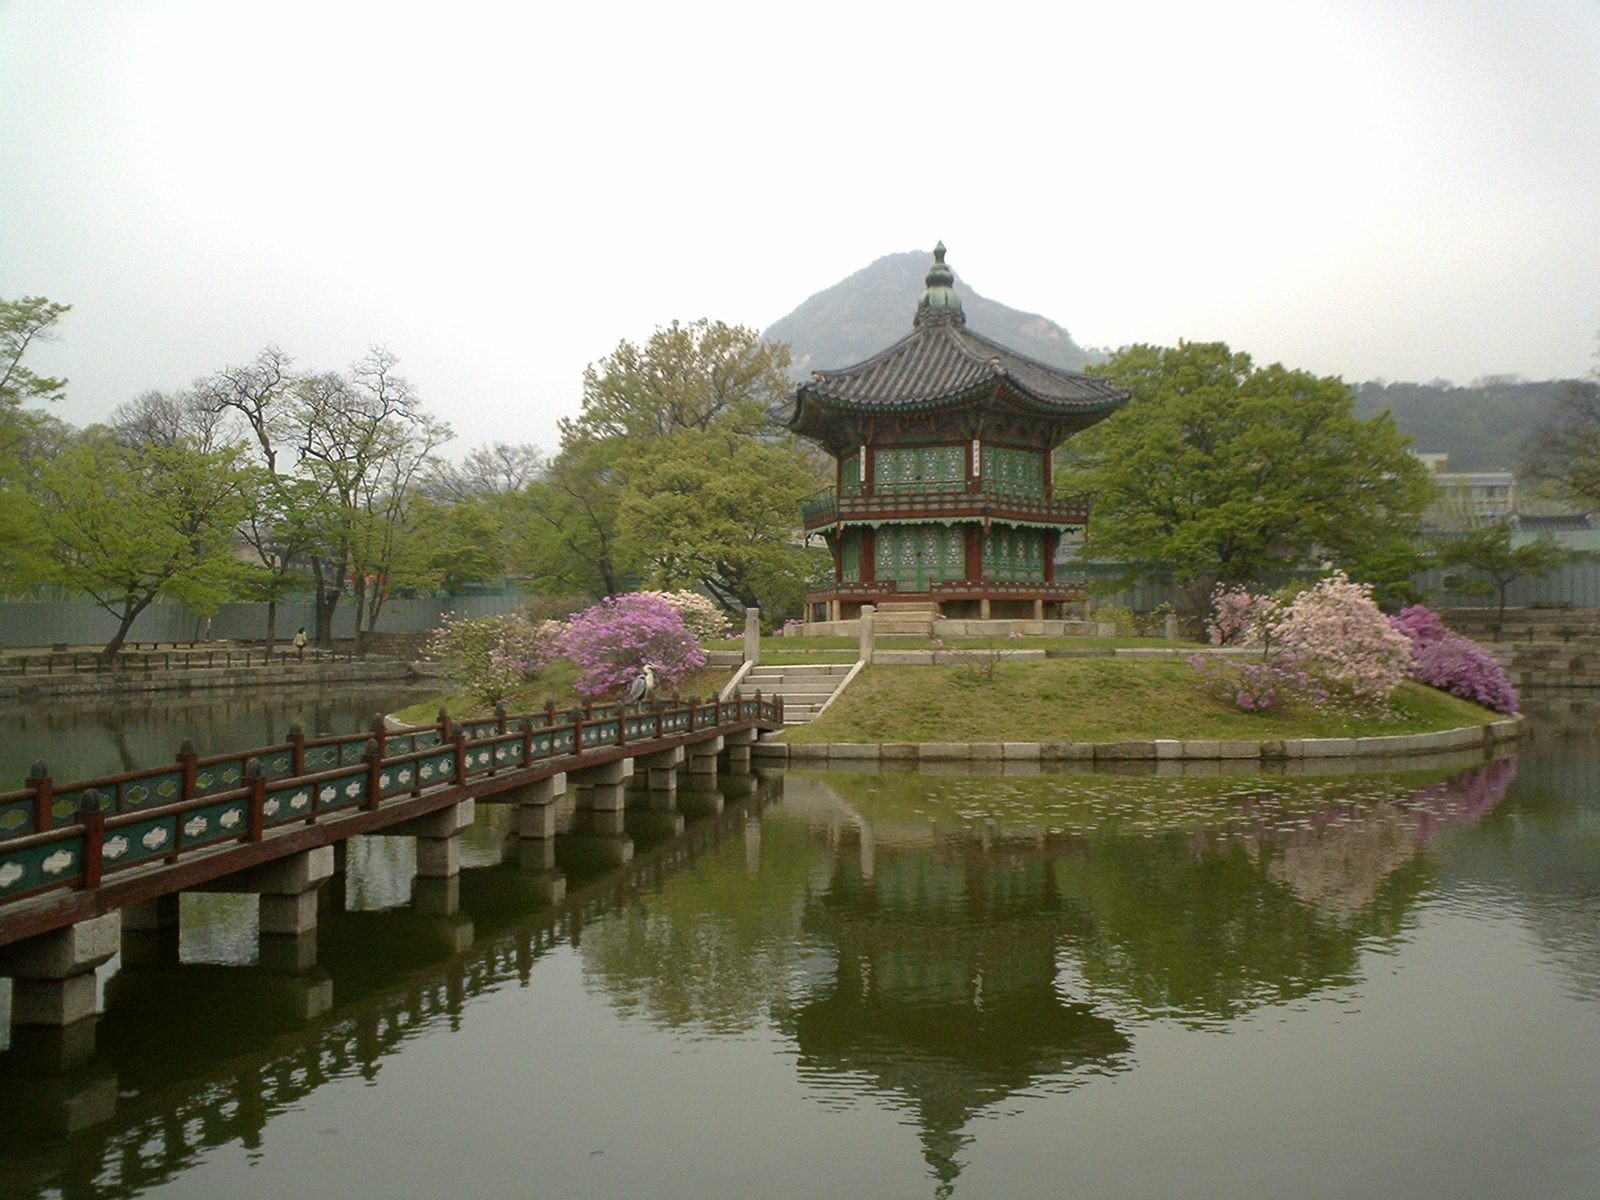  South  Korea  Travel  Guide and Travel  Info Exotic Travel  